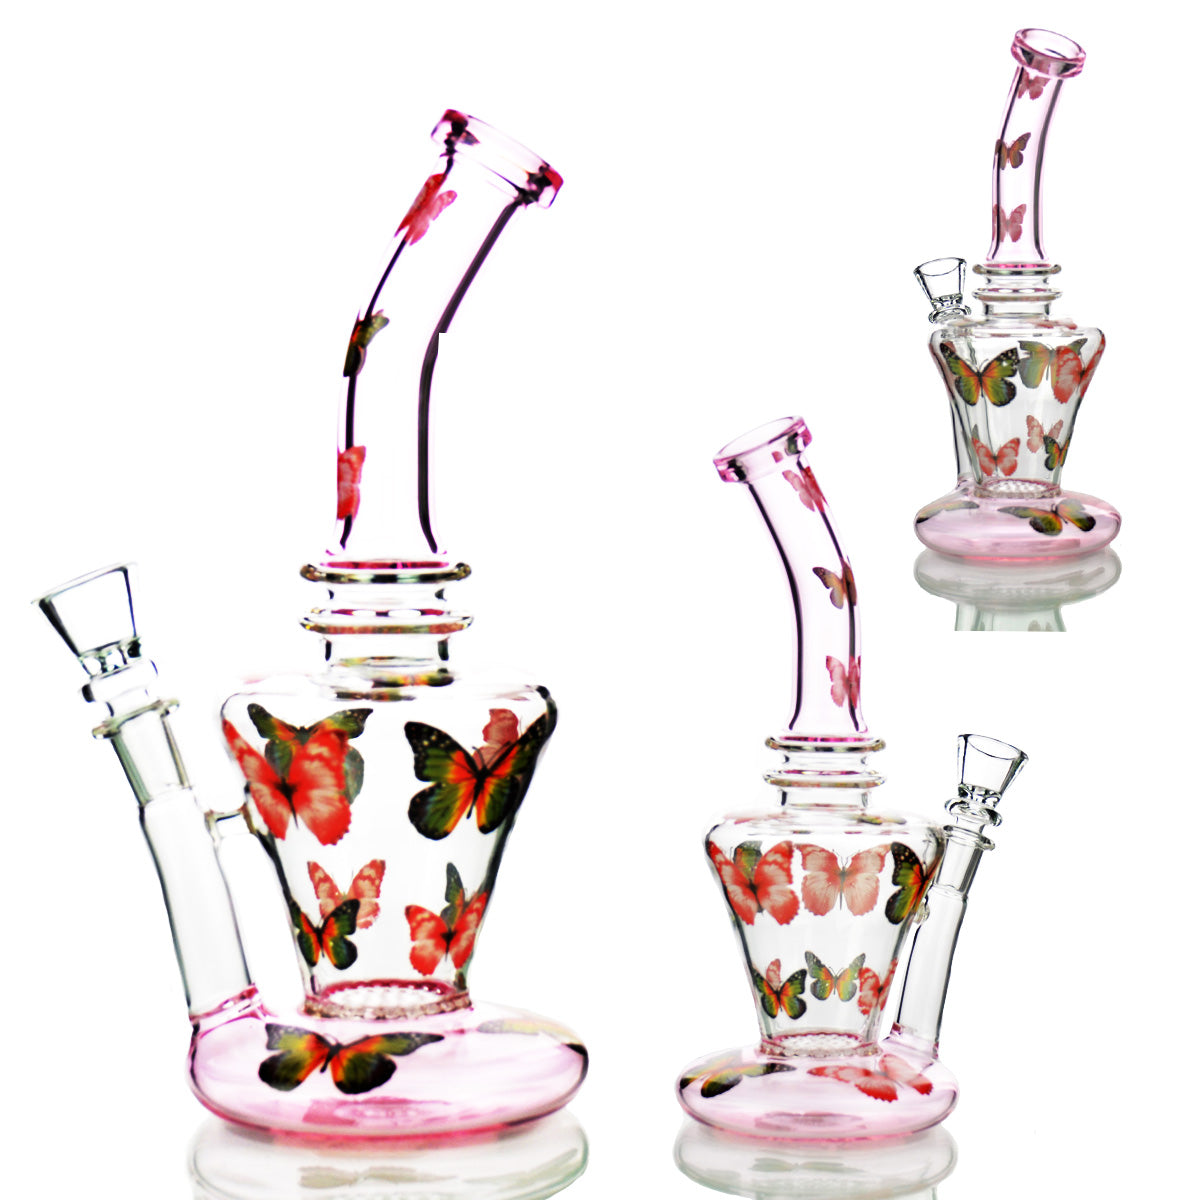 10'' Butterfly Girly Water PIPE Rig Hollow Base with Honeycomb and 14mm Male Bowl